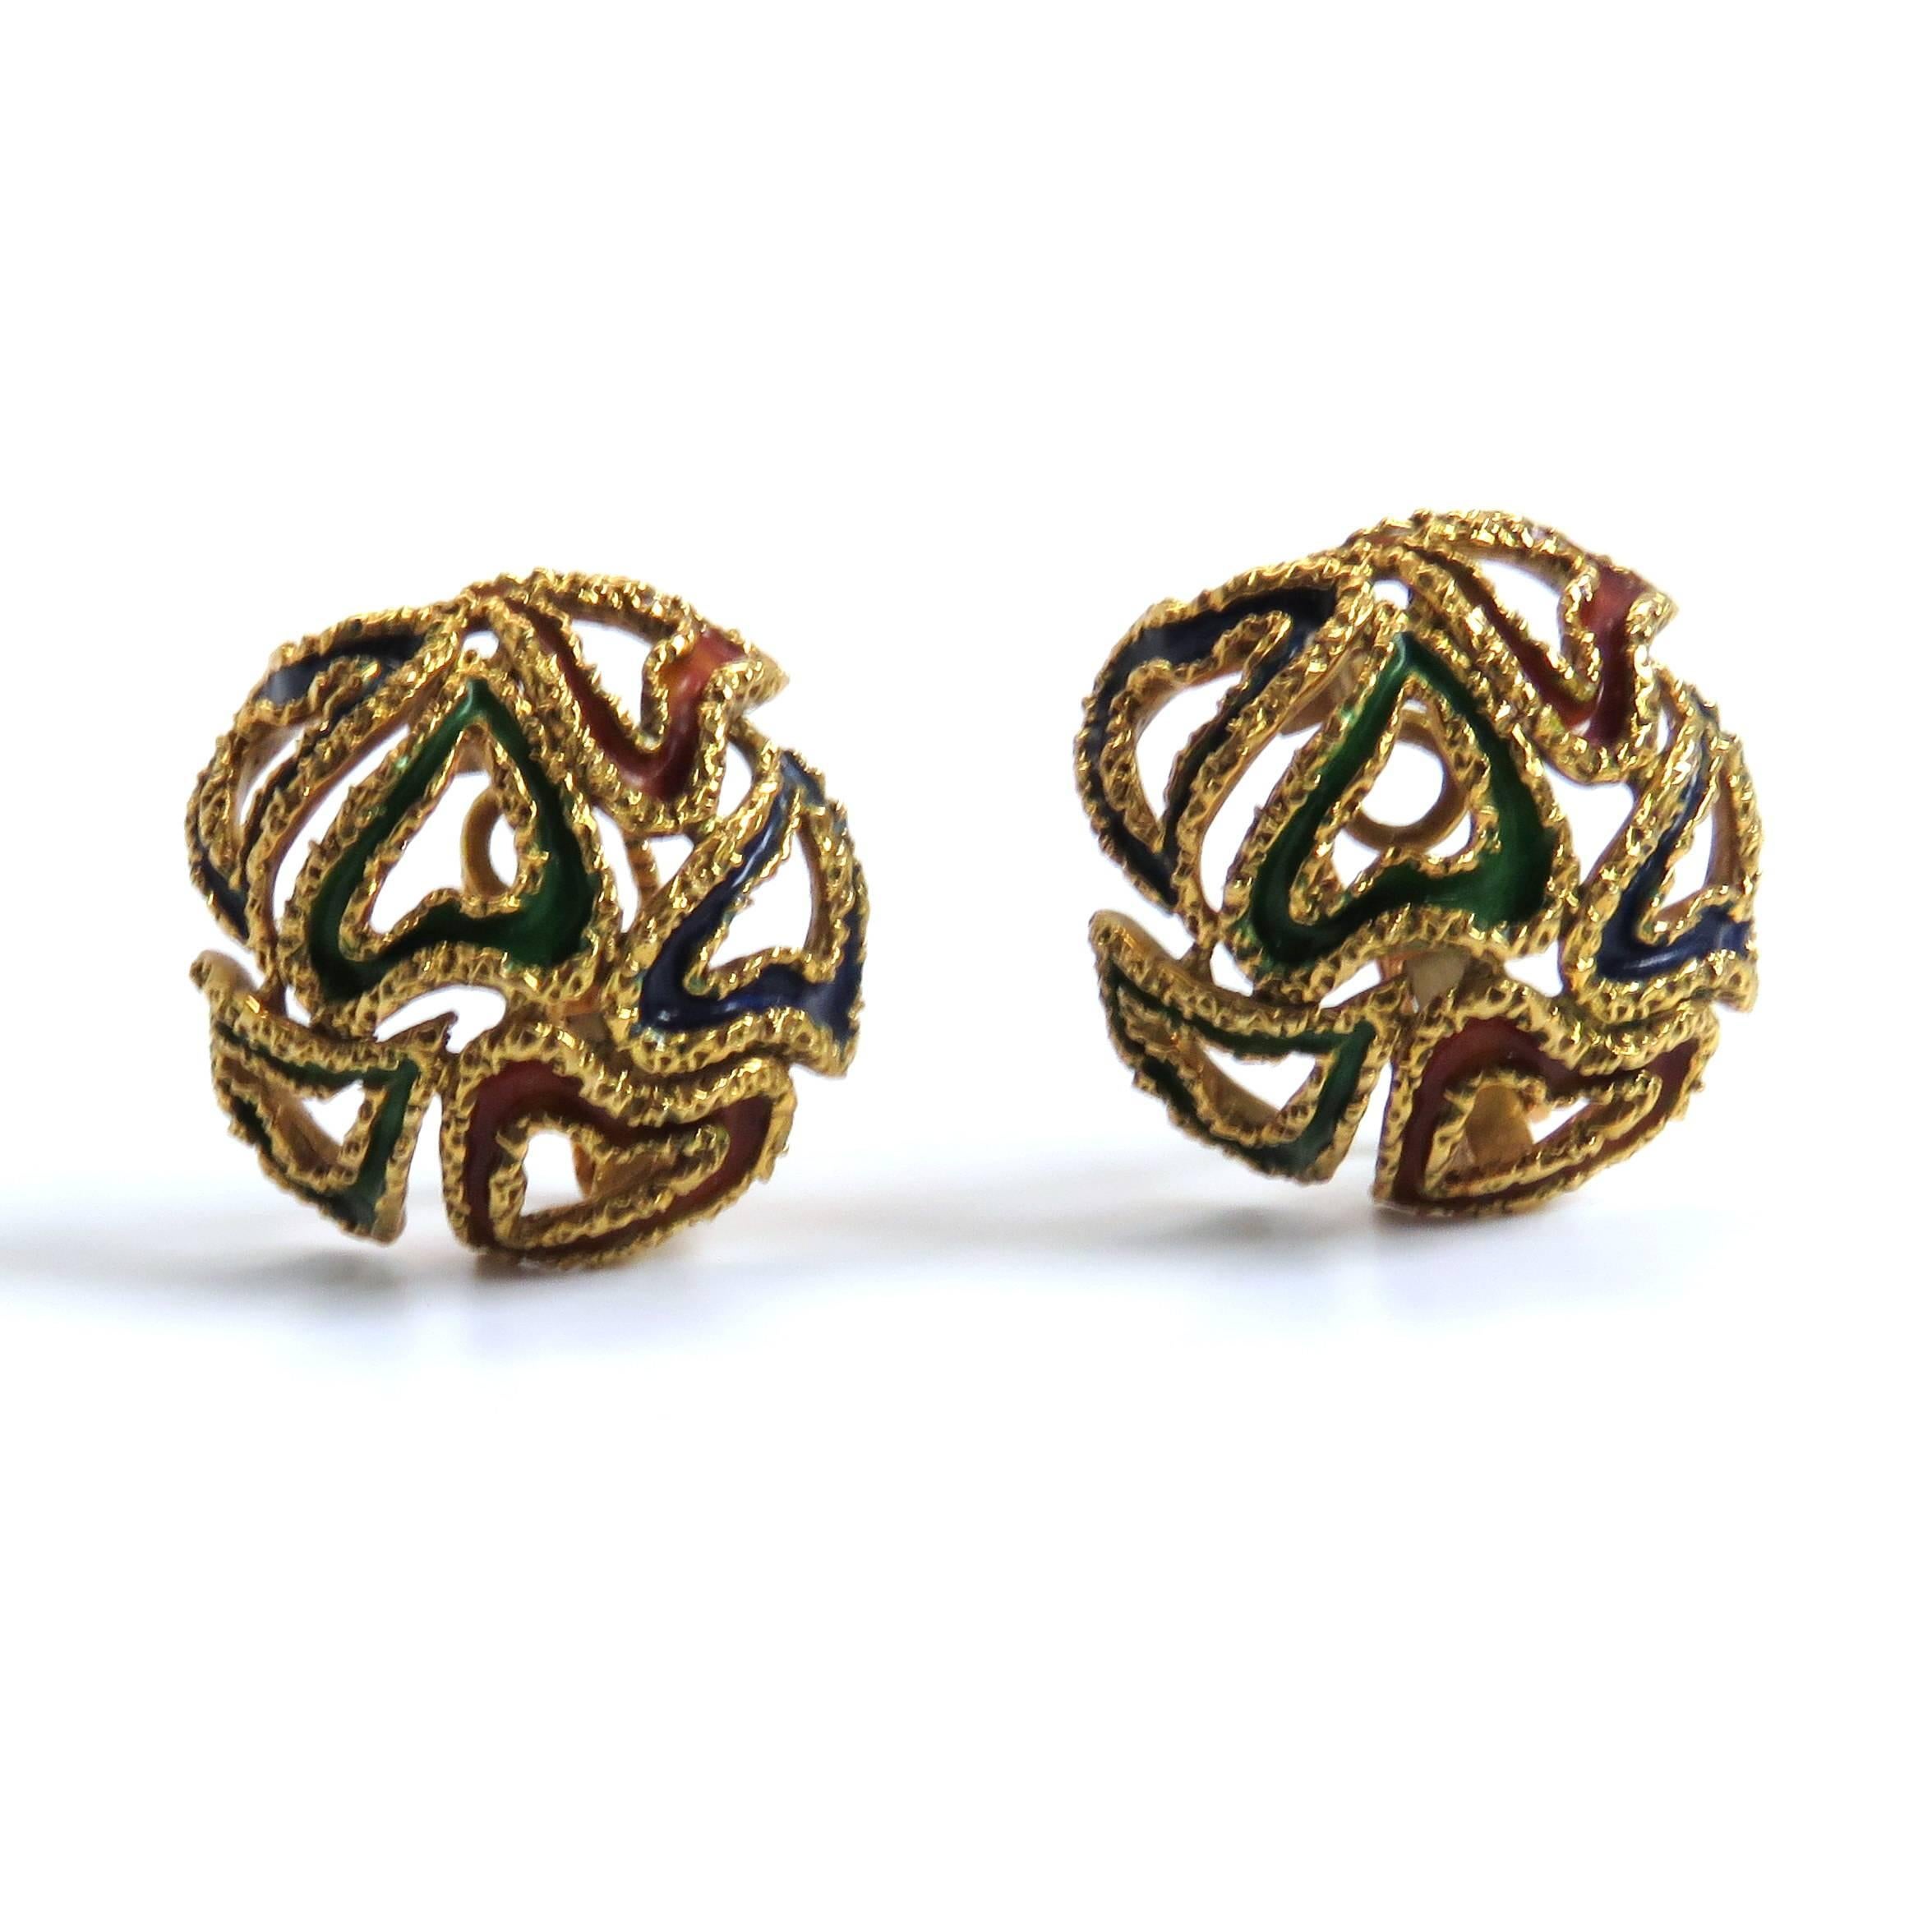 A pair of 18k yellow gold earrings adorned with blue, green and brown enamel.  The earrings measure 24mm in diameter and weigh 17.8 grams.  Marked: Hermes Paris.